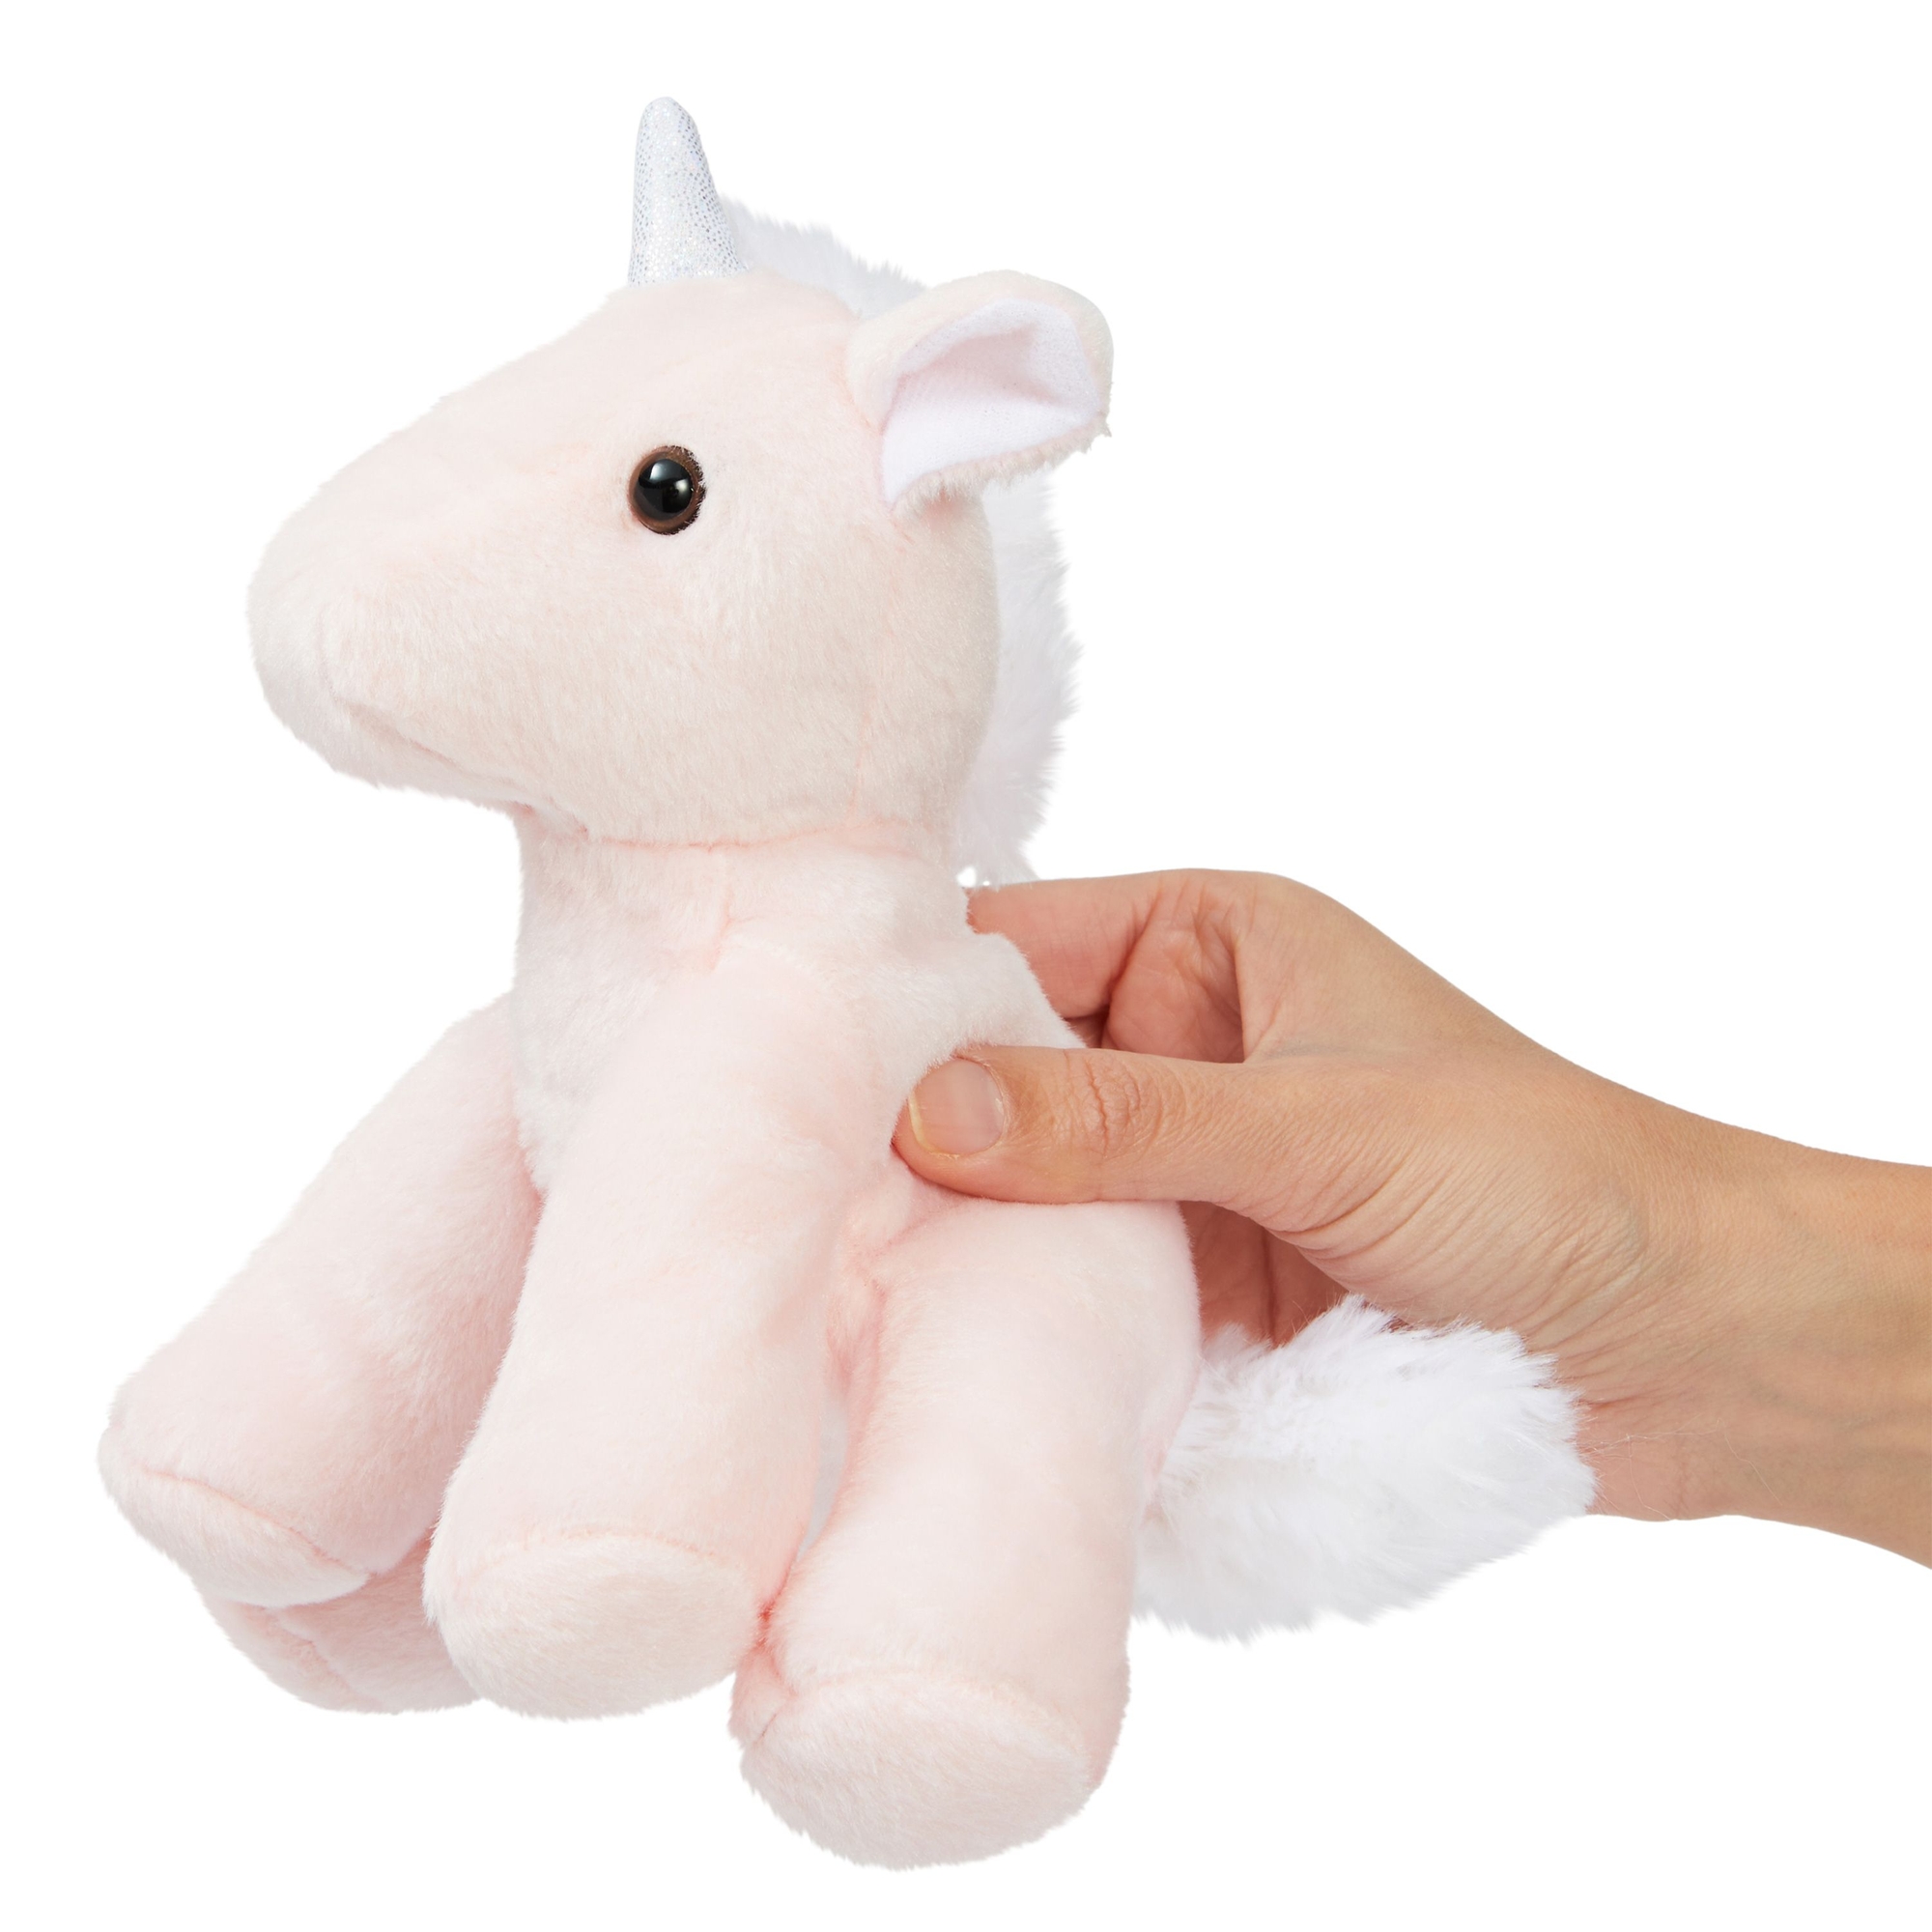 4 Pack Small Unicorn Plush for Girls, 7-inch Stuffed Animal Toys for Kids Birthday Gifts, Pastel Party Favors (4 Colors) - image 5 of 10